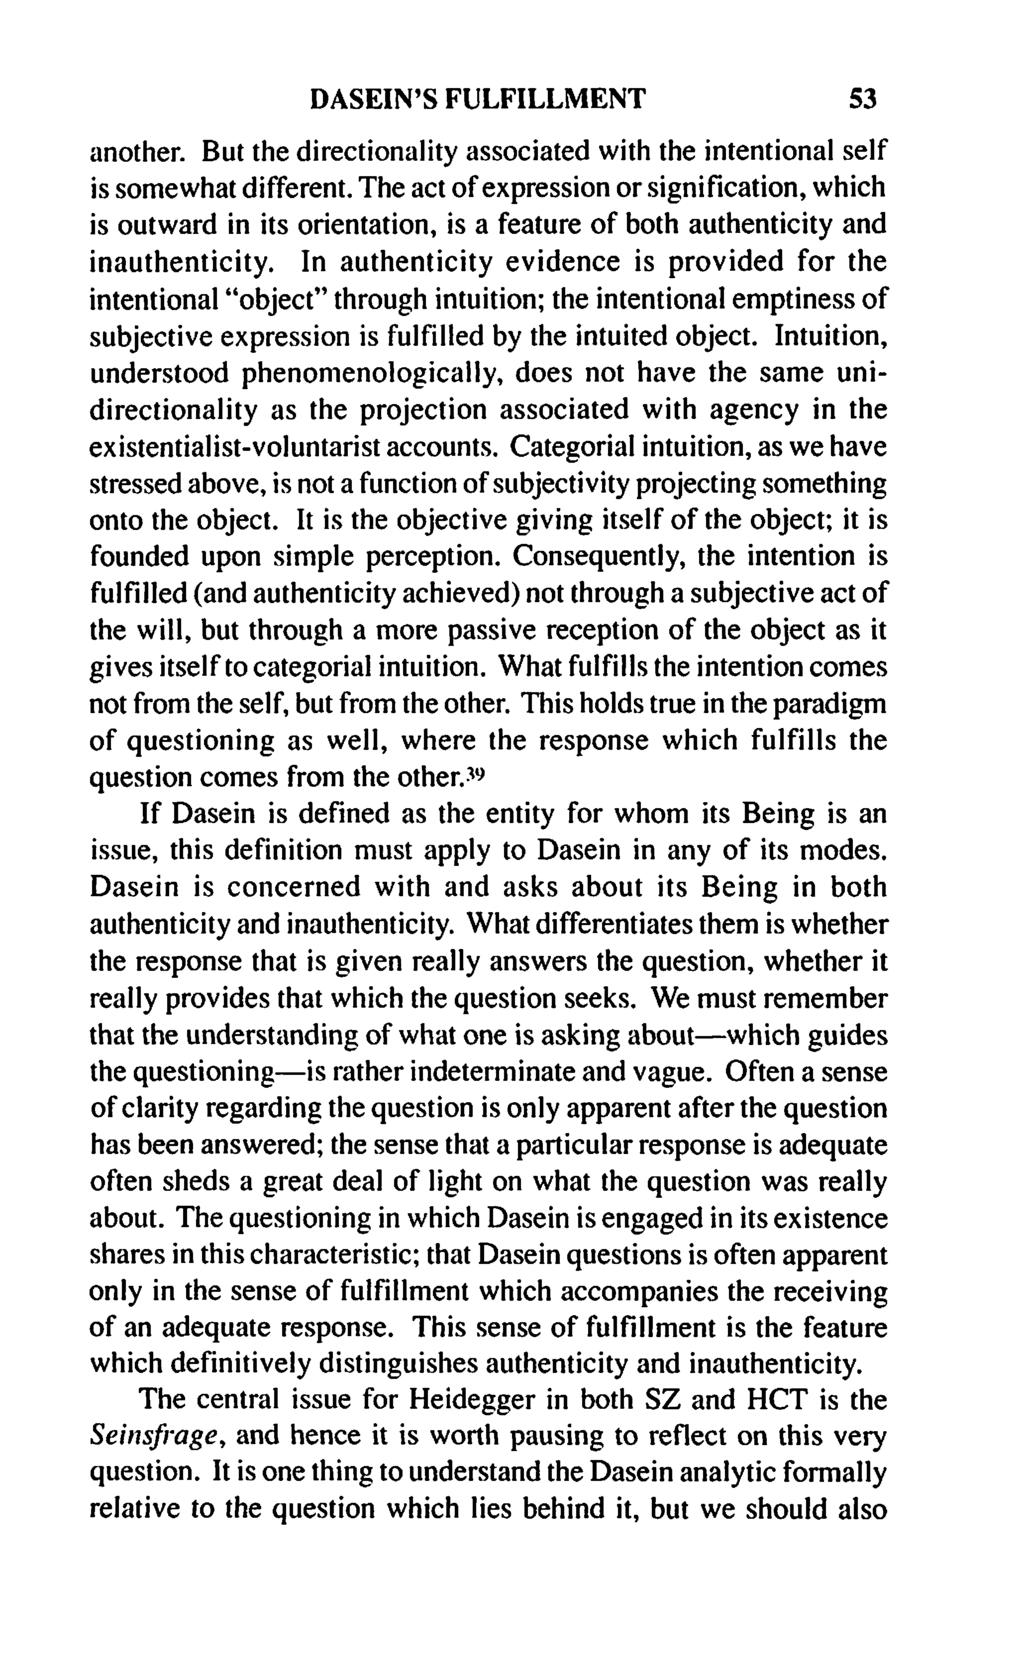 DASEIN'S FULFILLMENT 53 another. But the directionality associated with the intentional self is somewhat different.